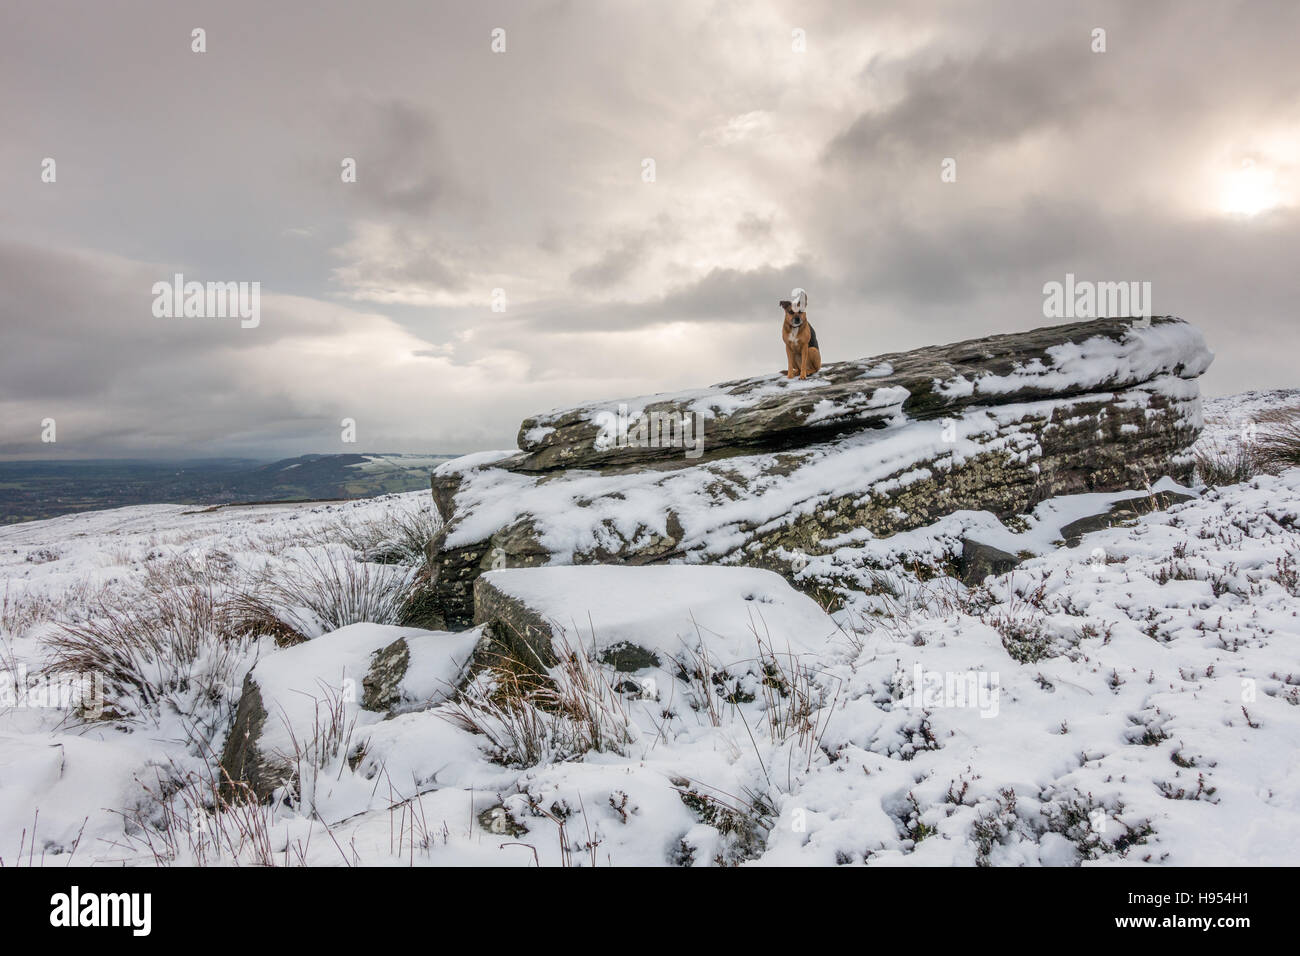 Leeds, West Yorkshire, UK. 18th November 2016. UK Weather. More snow hits the higher ground in Yorkshire, Ilkley Moor, Ilkley, UK. Rebecca Cole/Alamy Live News Stock Photo